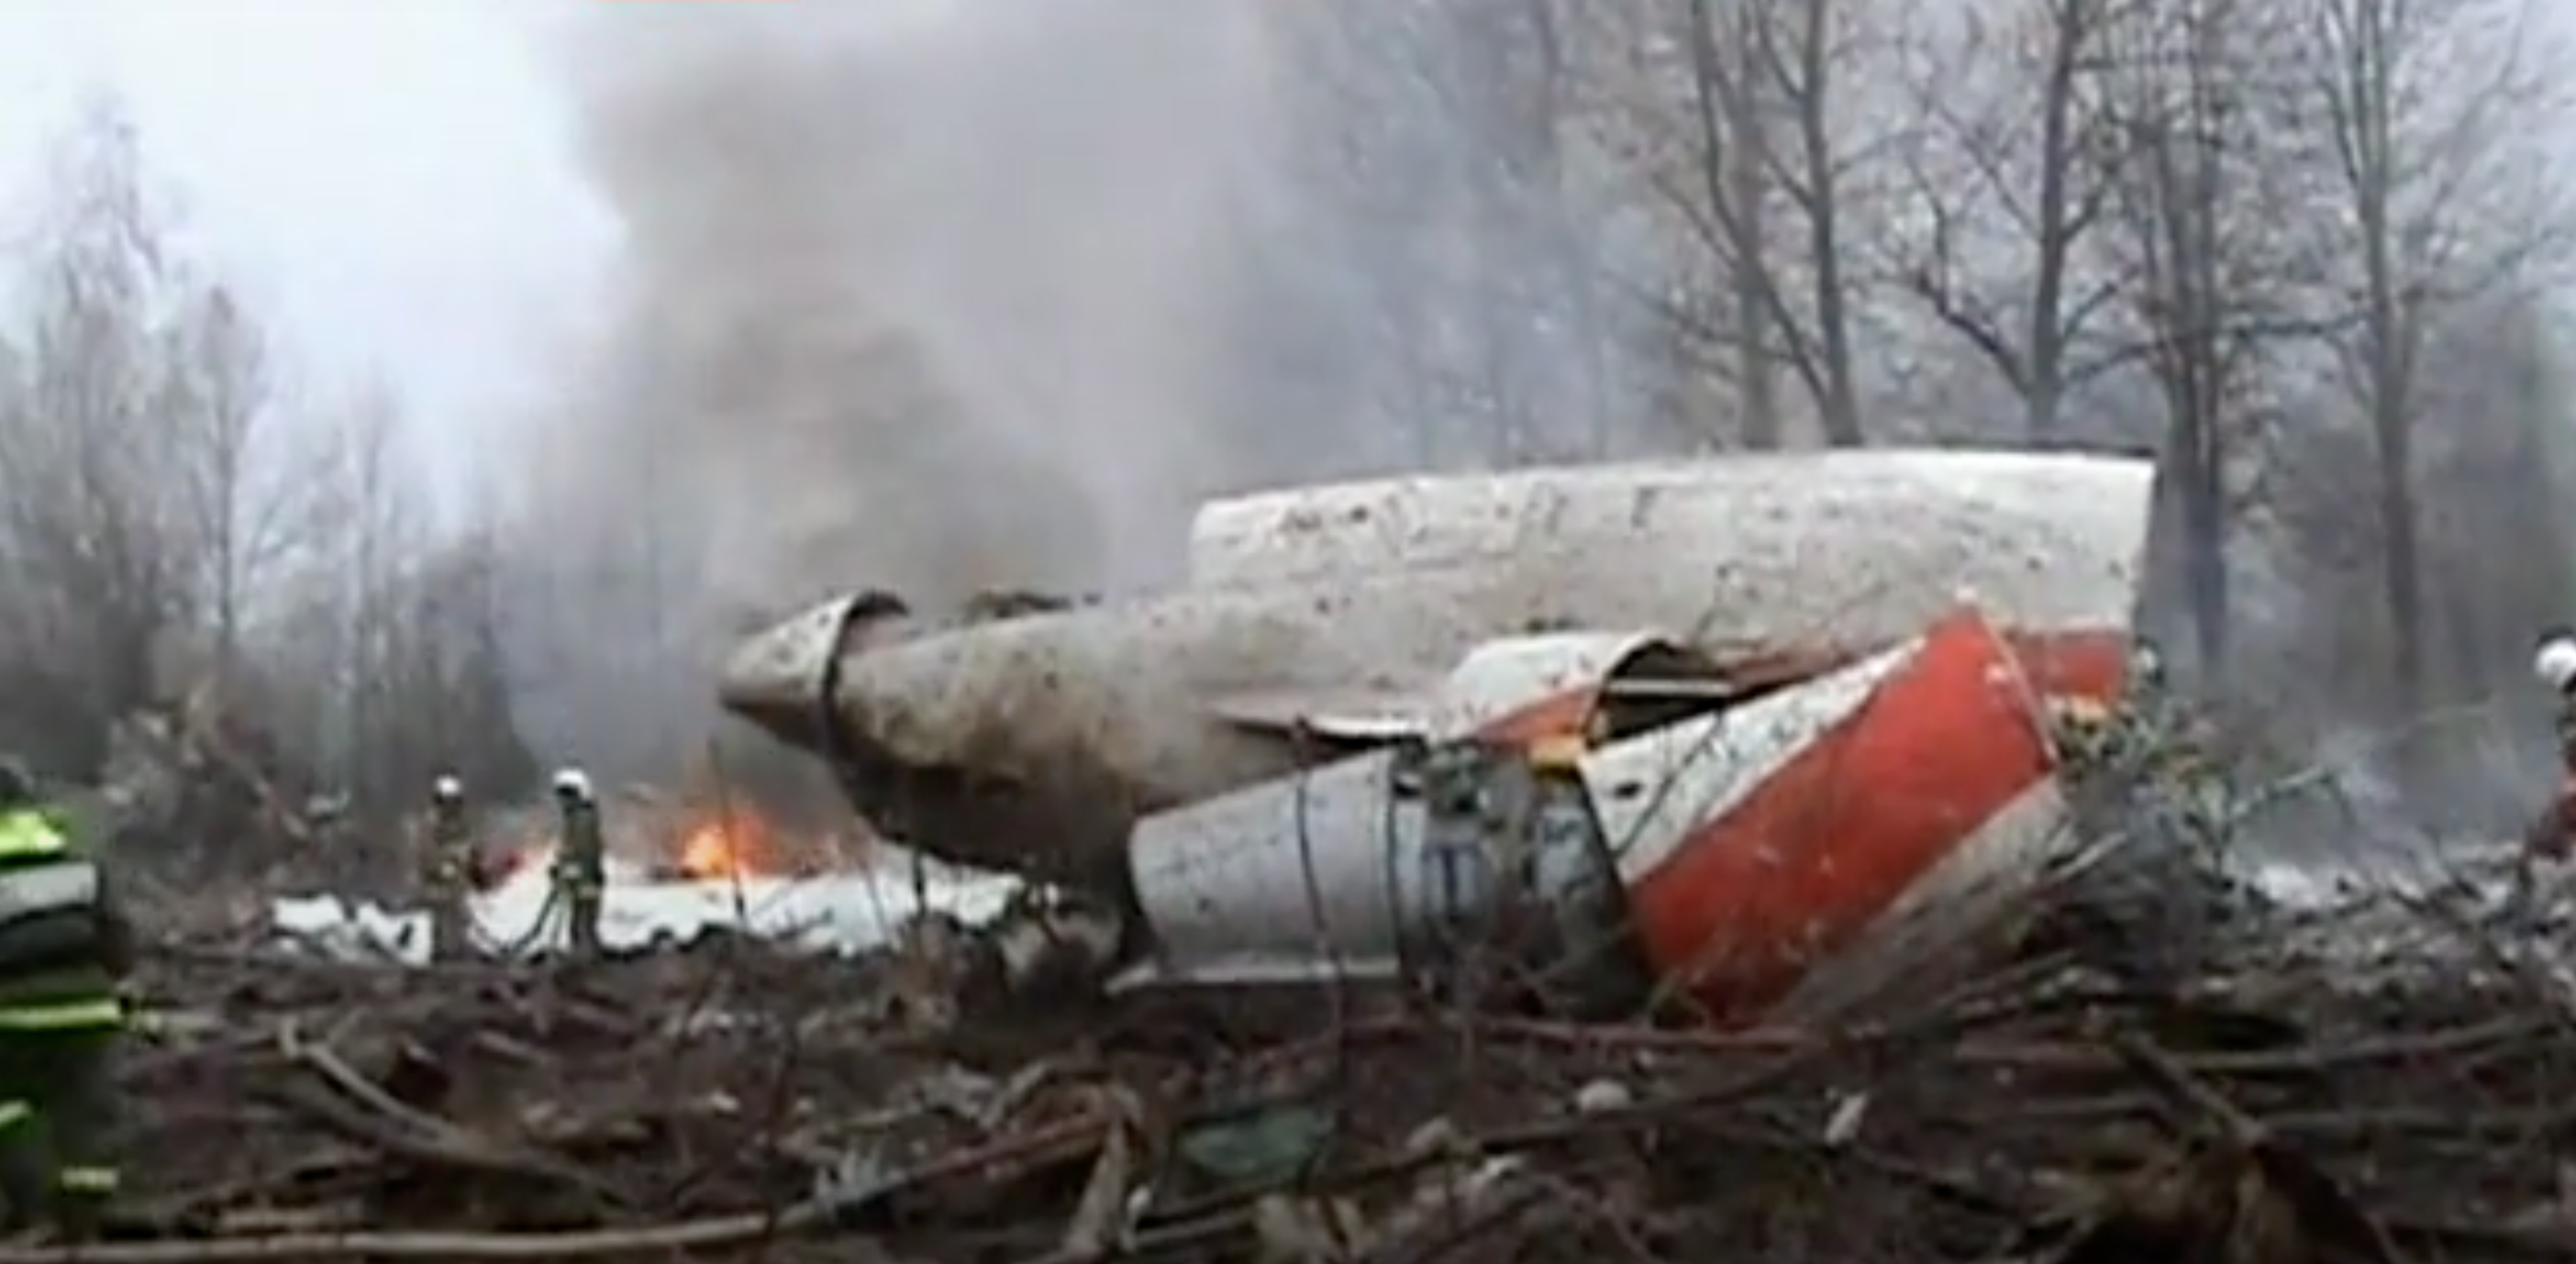 2010: Polish President and his Wife Killed in Plane Crash in Russia